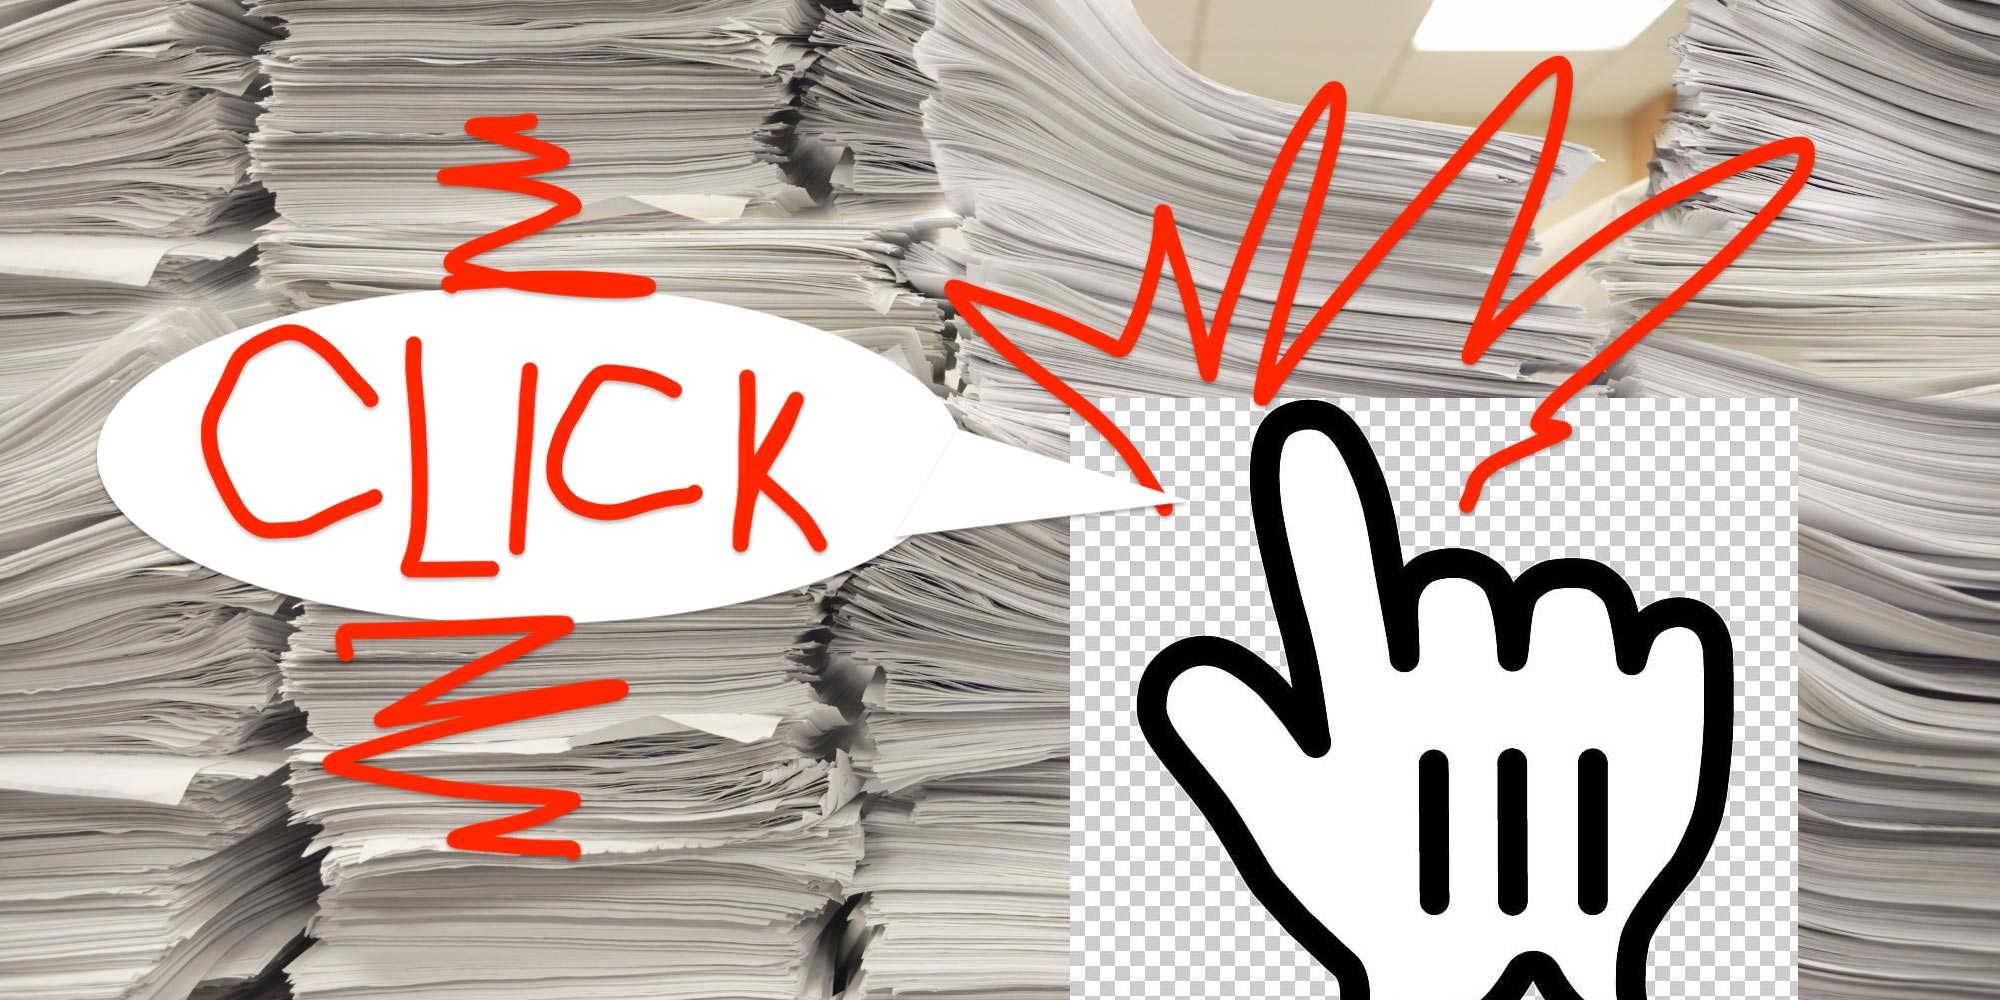 Stacks of paper
with a pointer cursor badly pasted on top,
with red scribbles coming out of the finger tip,
and a speech bubble that say CLICK
